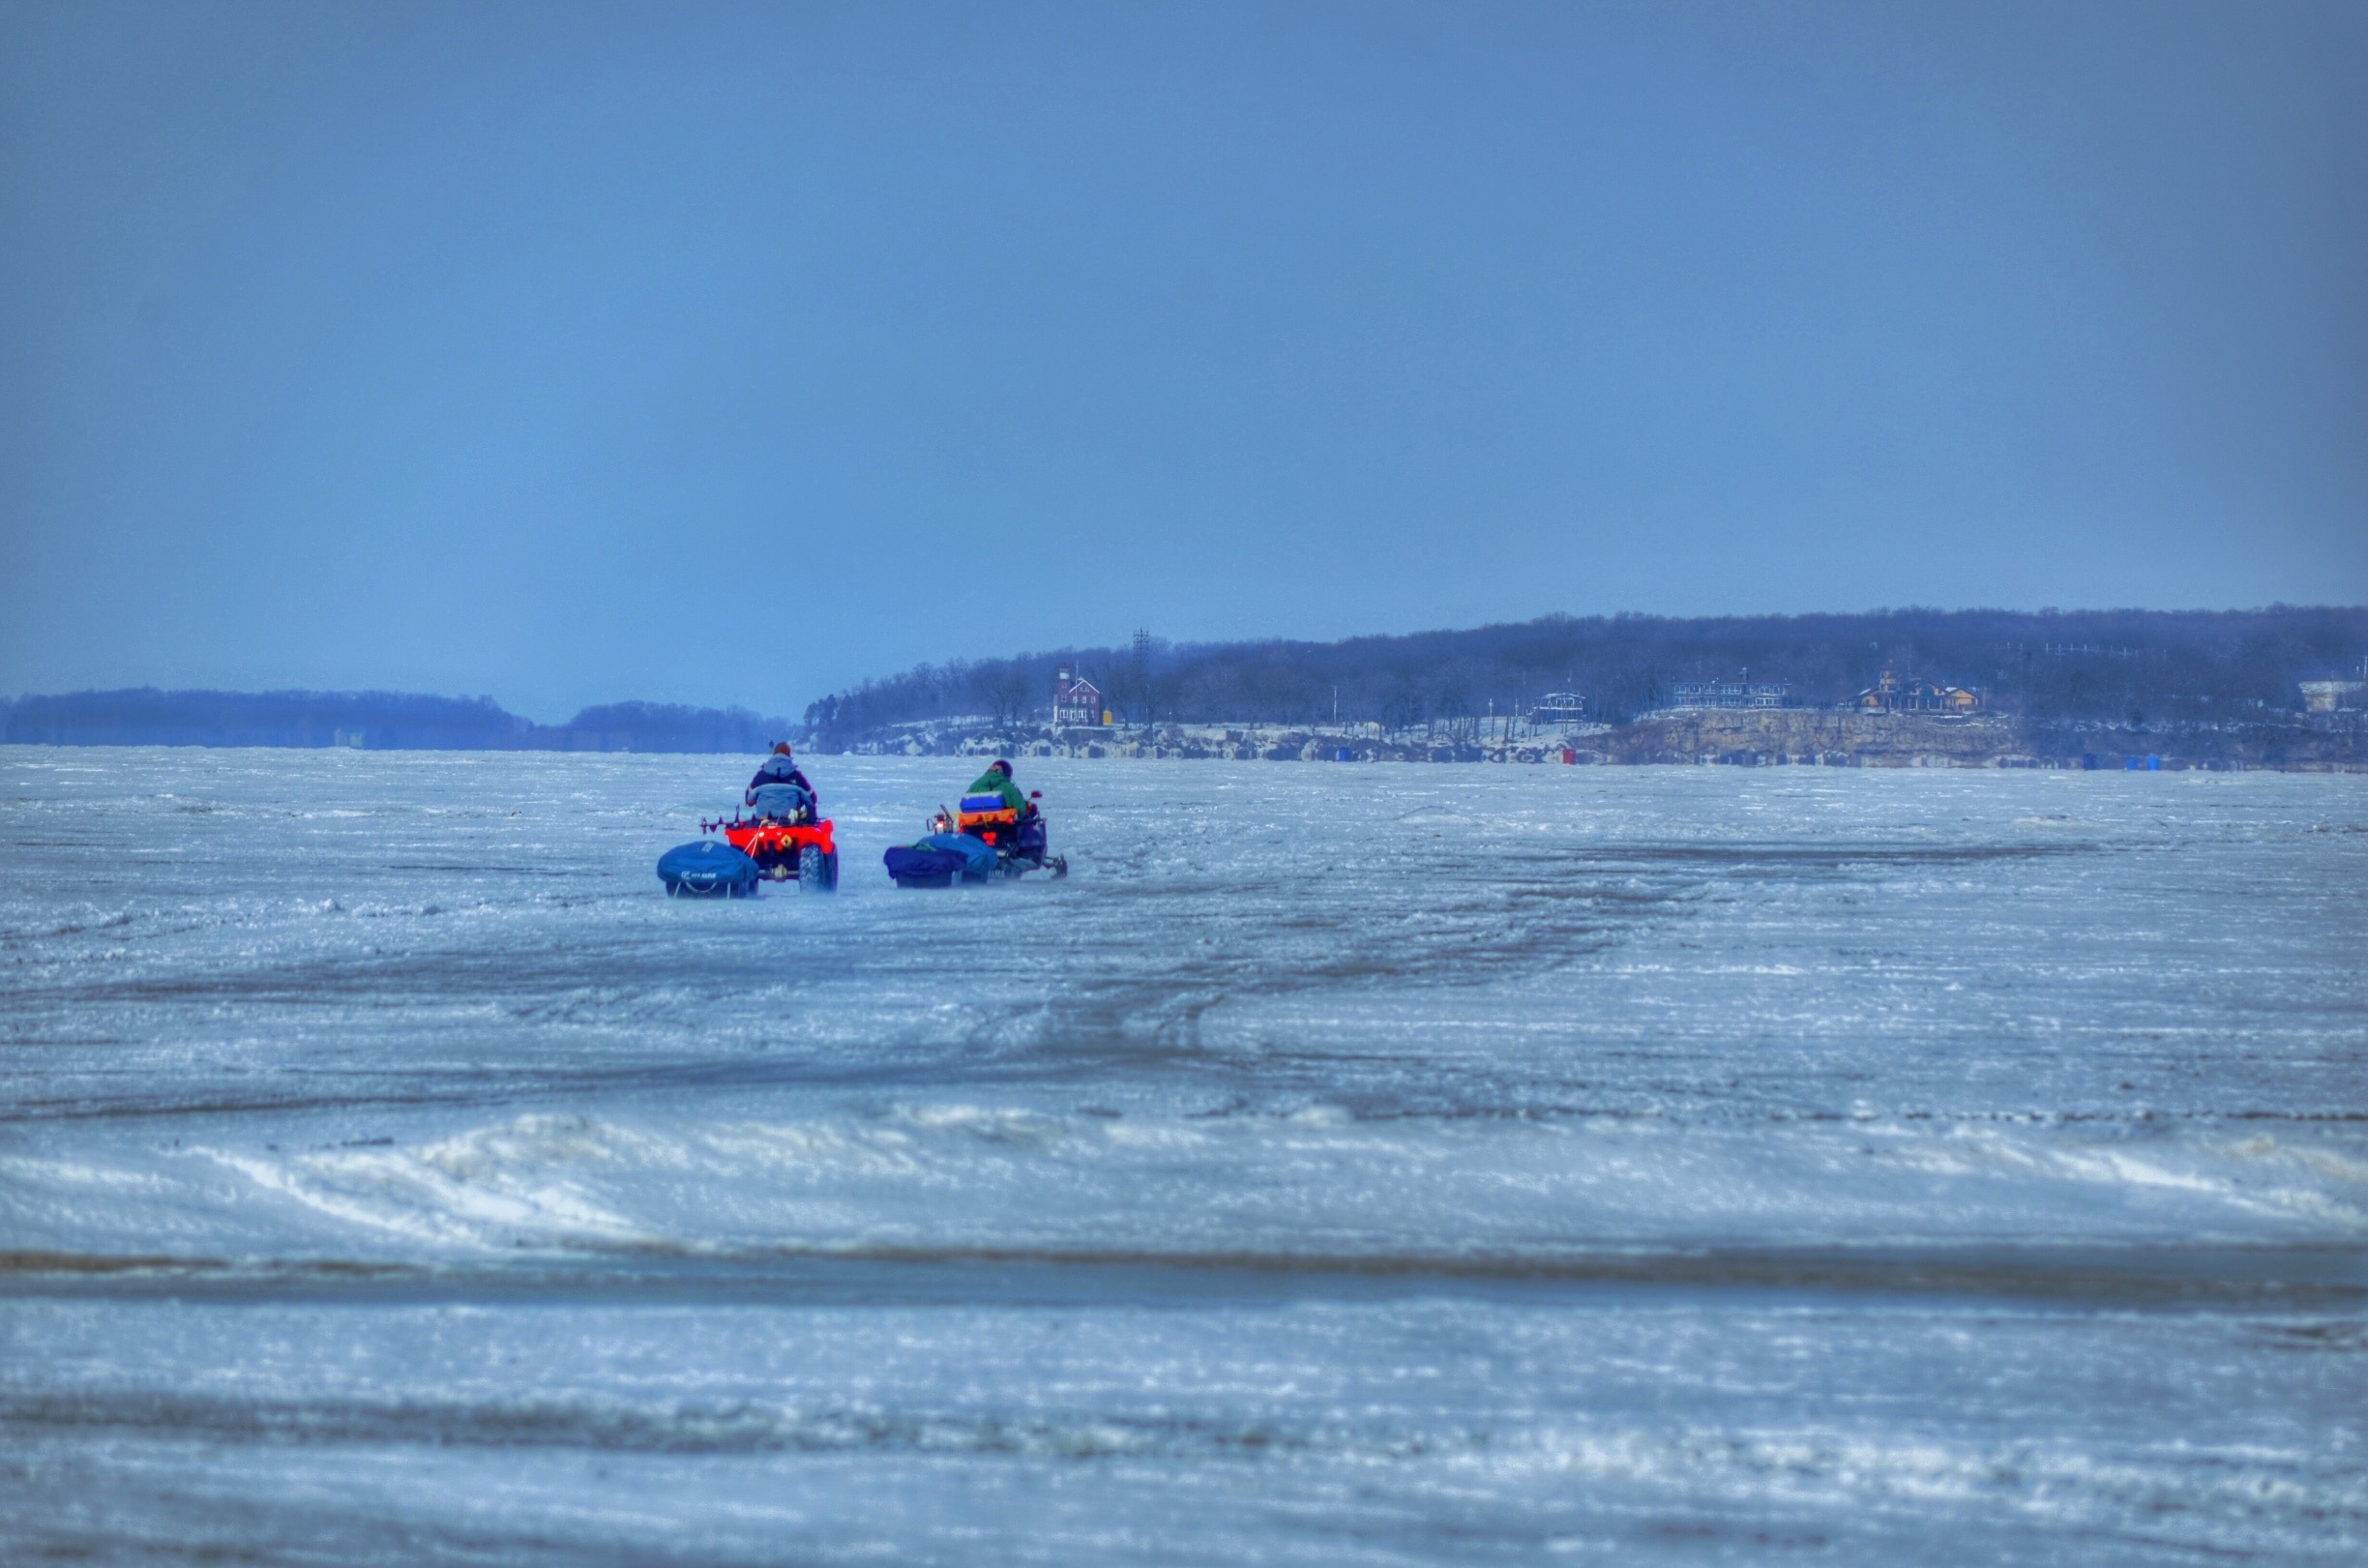 When Lake Erie has enough ice, cities of ice fisherman gather at the Catawba Island State Park to head out towards Put-in-Bay to try their luck at ice fishing.  Great bucket list experience for those who've never had the opportunity. 